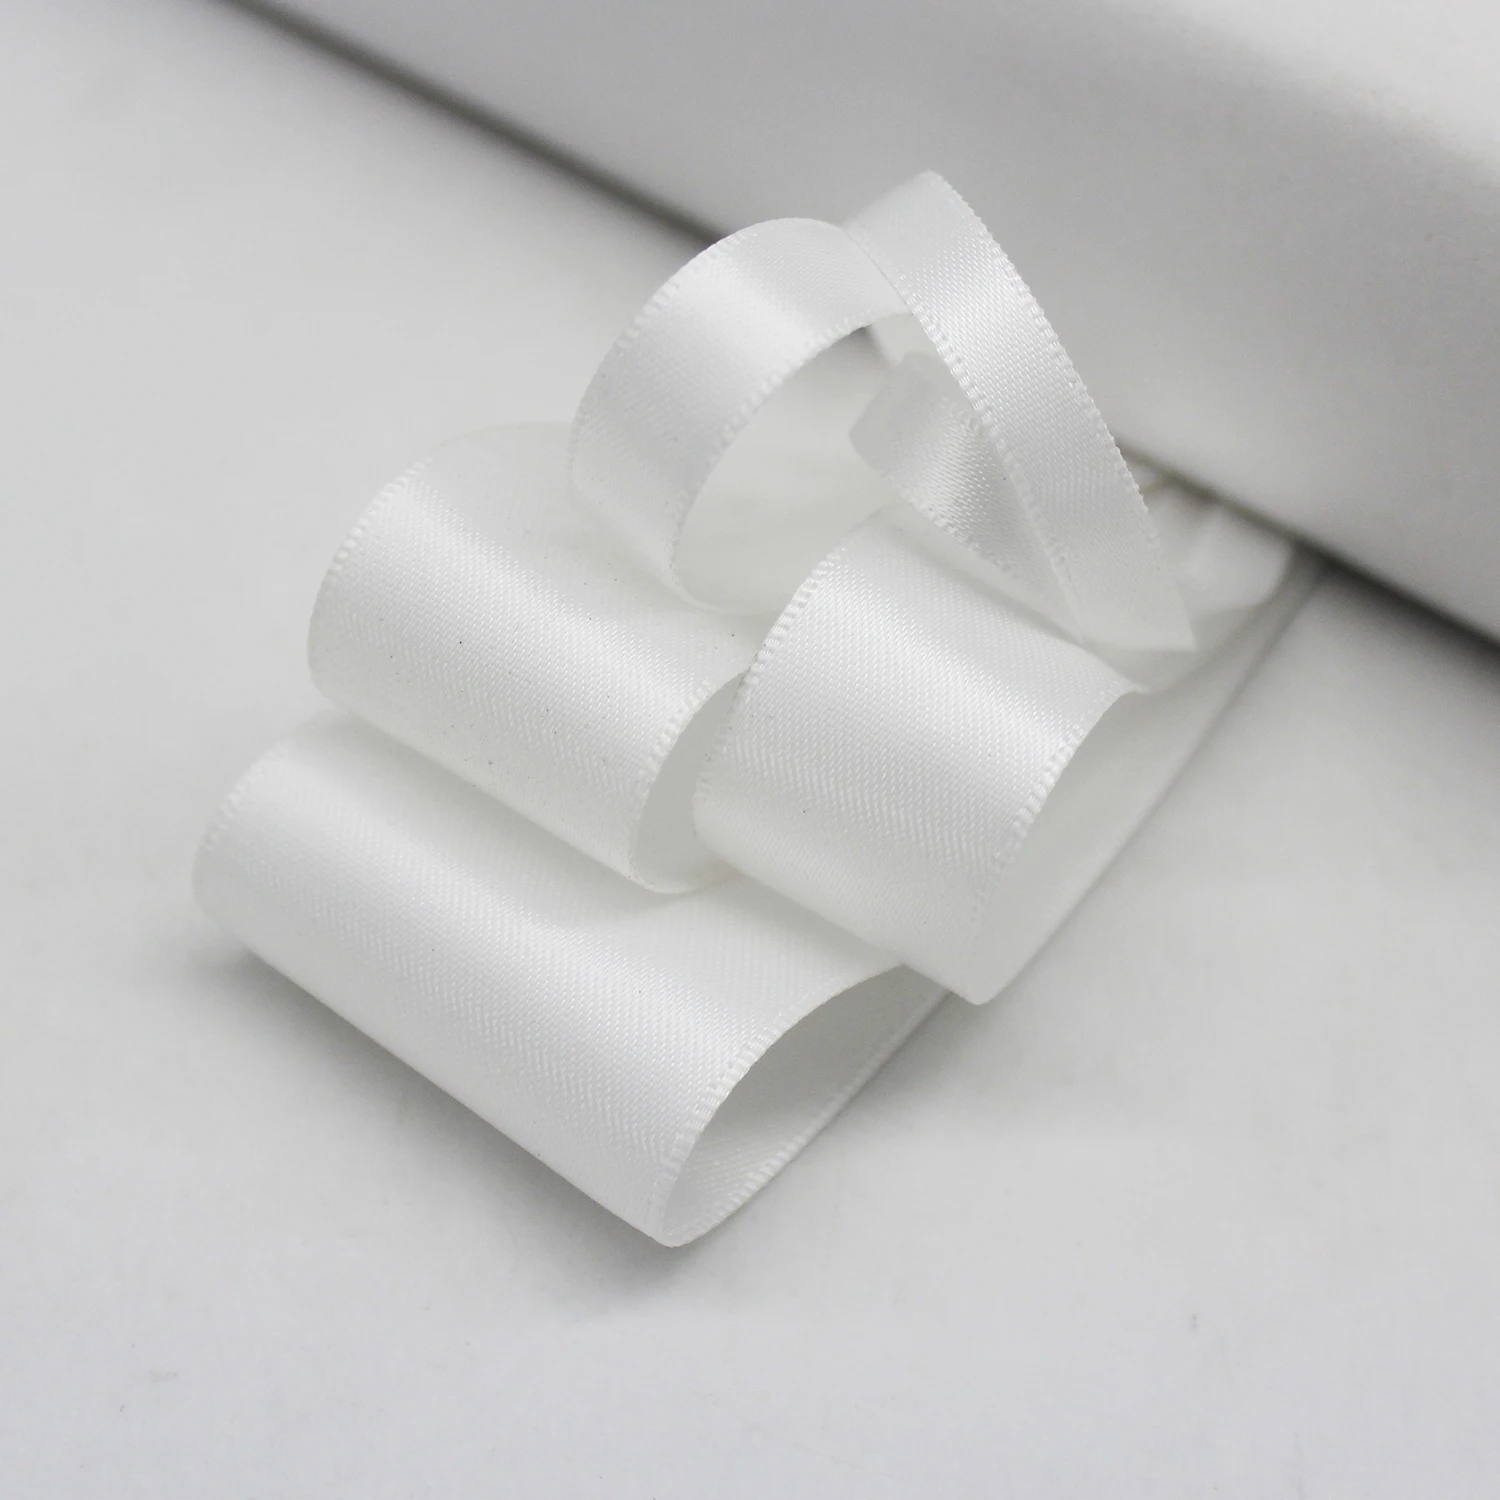 Details about   1 M x 16mm or 25mm Satin Ribbon Double Faced Side for invitation craft hair-bow 